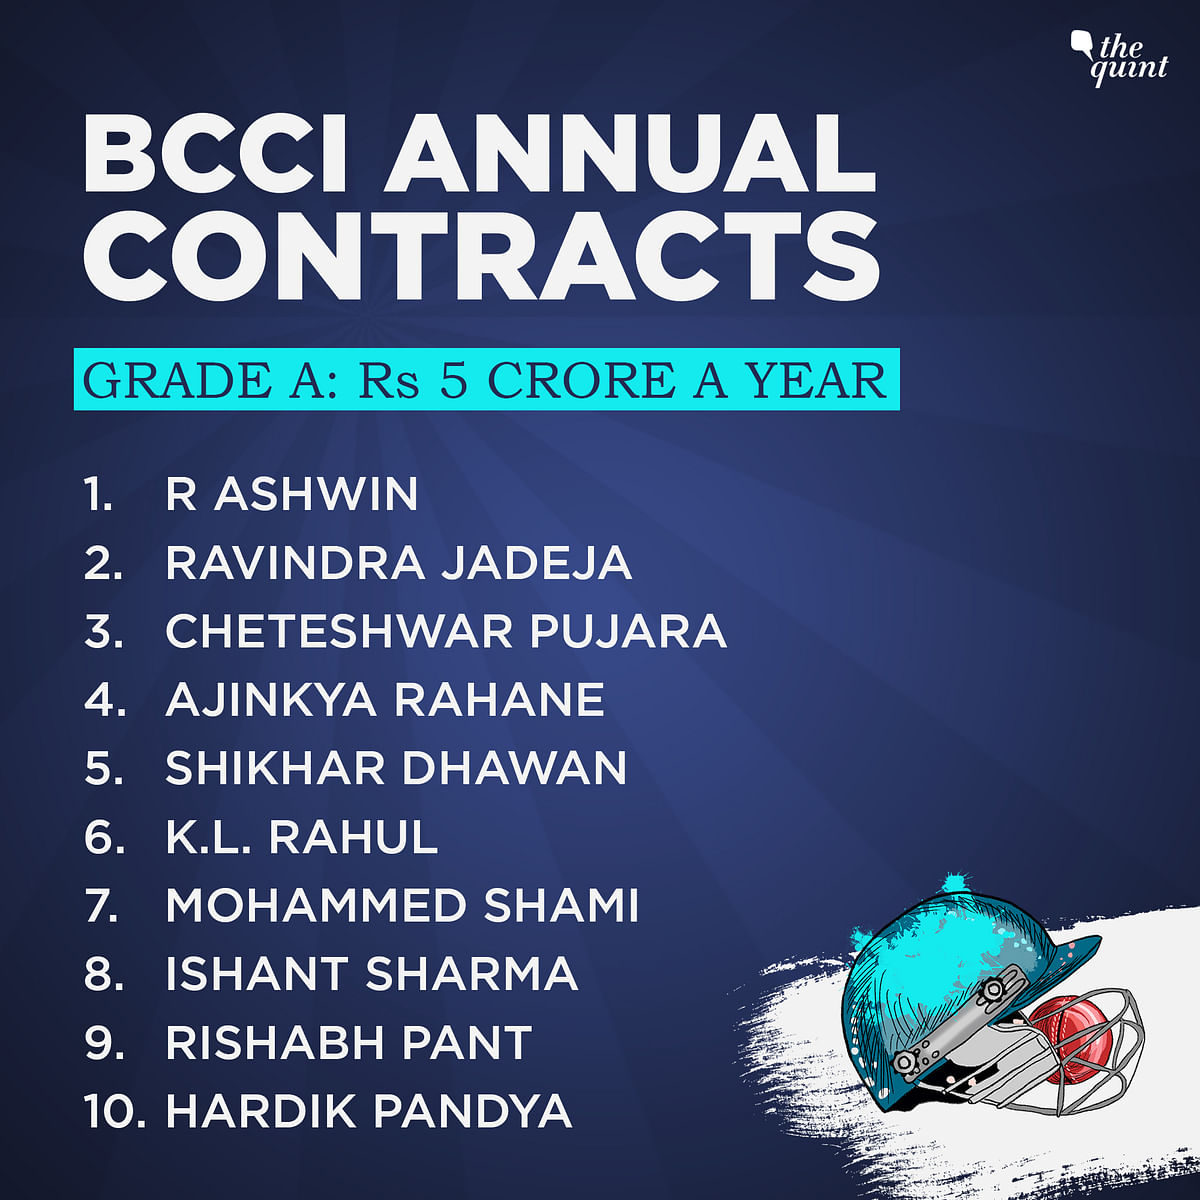 Virat Kohli and Rohit Sharma along with Jasprit Bumrah will earn Rs 7 crore a year as their BCCI salary.